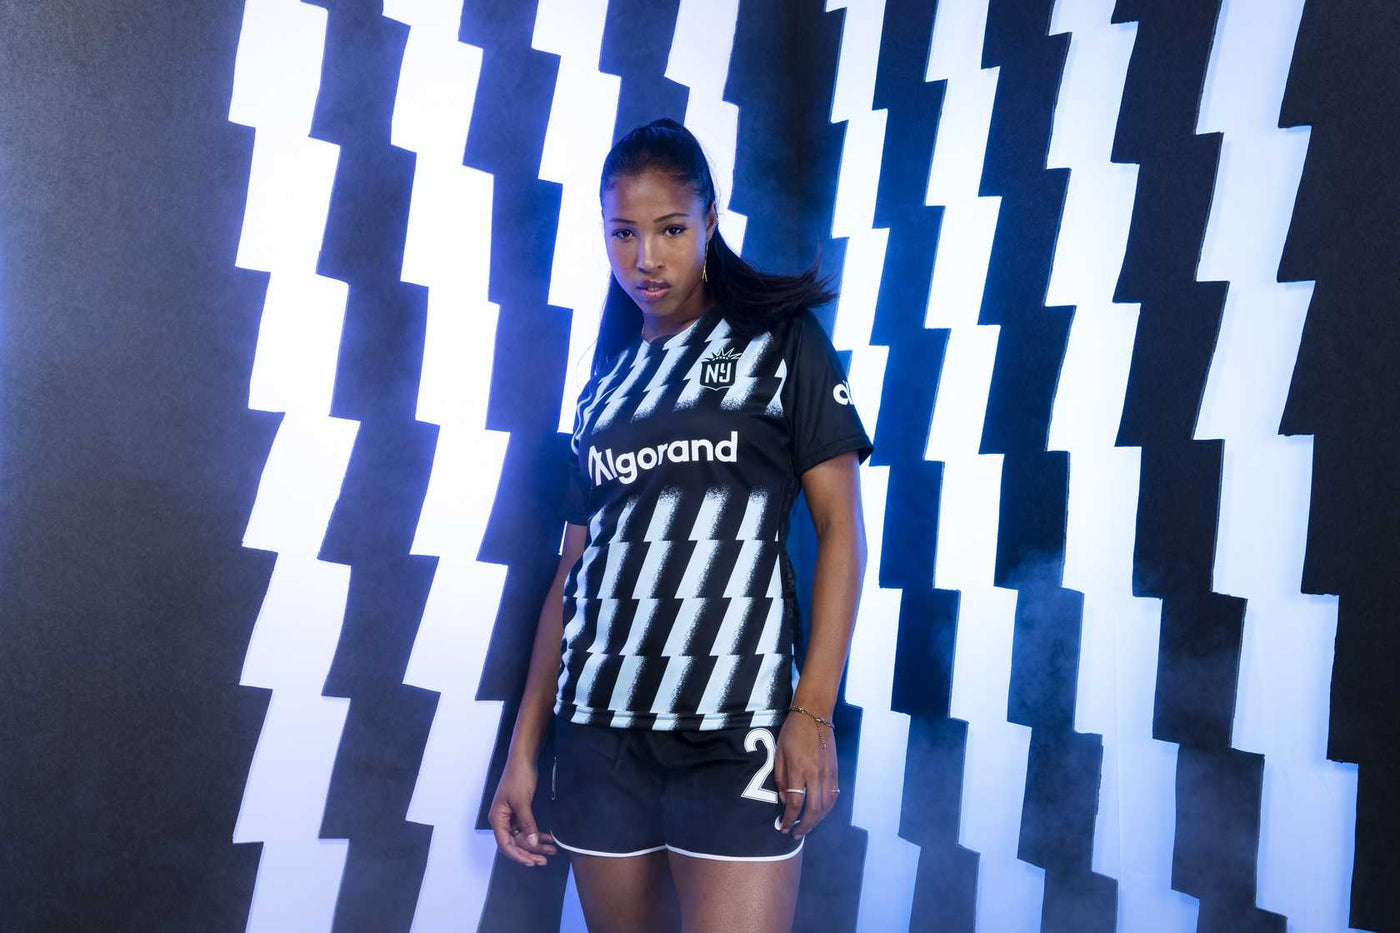 Newcastle United - Introducing our new 2021/22 away kit